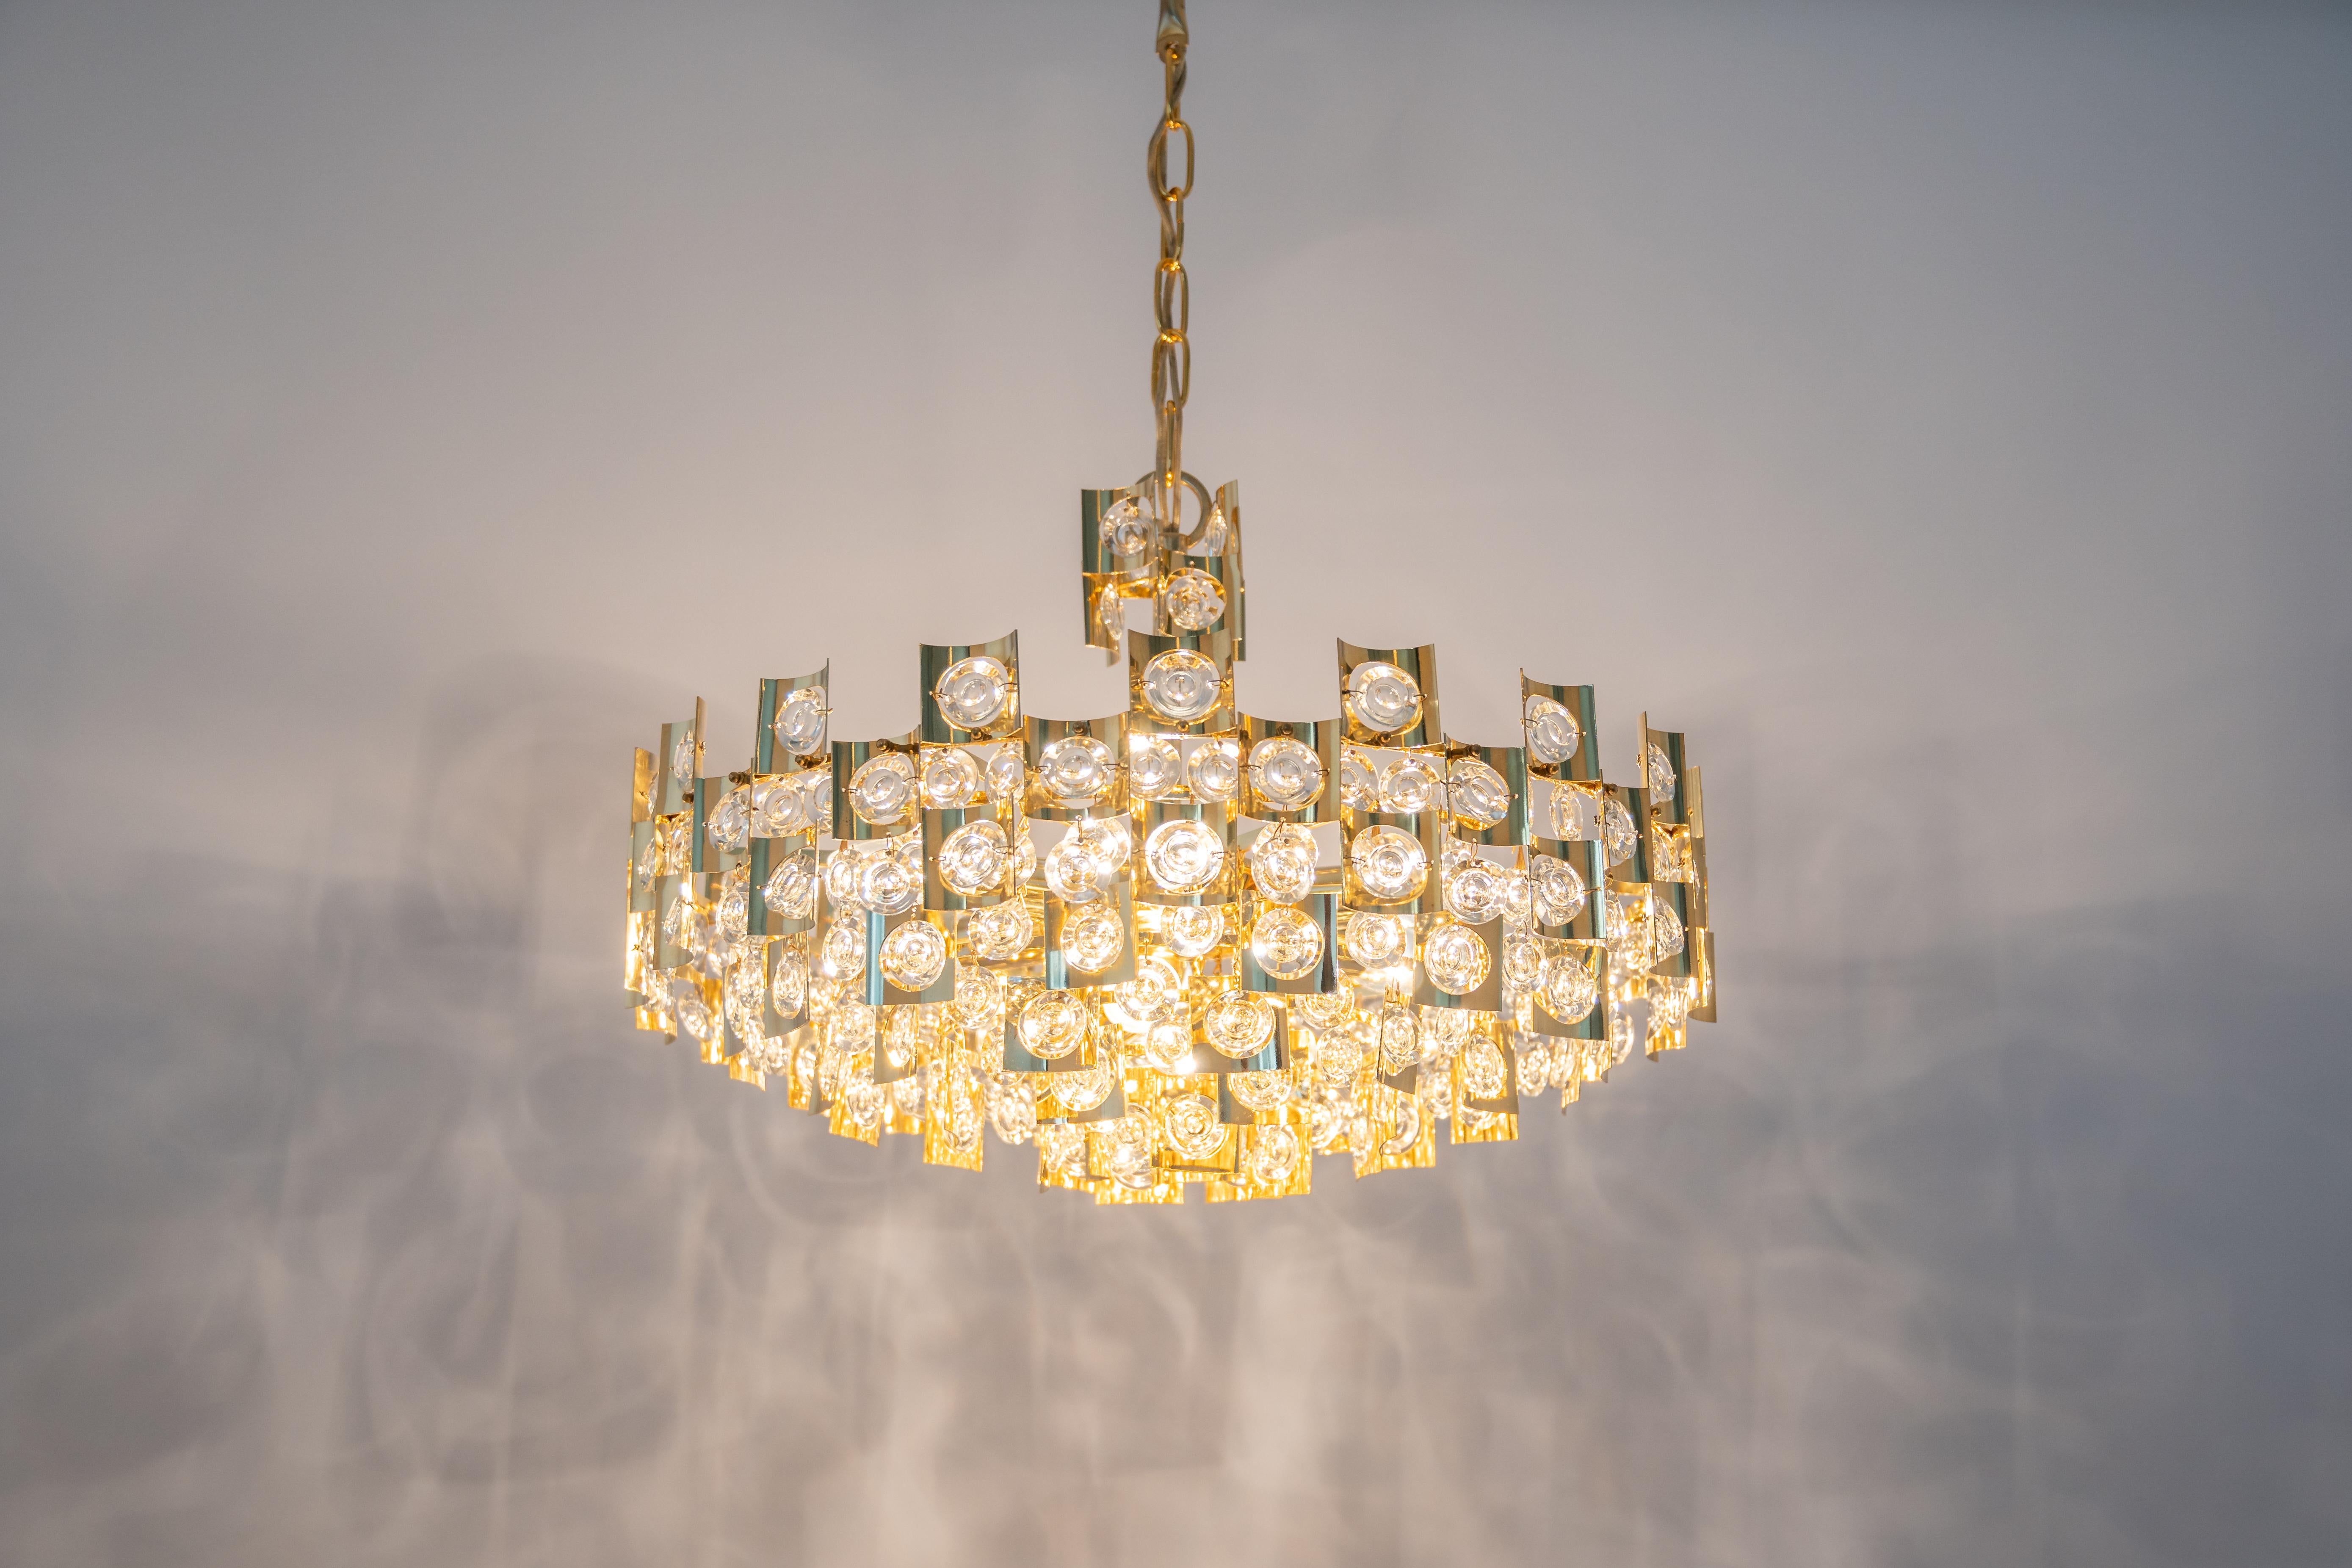 Impressive Large Gilt Brass and Crystal Glass Chandelier by Palwa Germany, 1960s For Sale 7